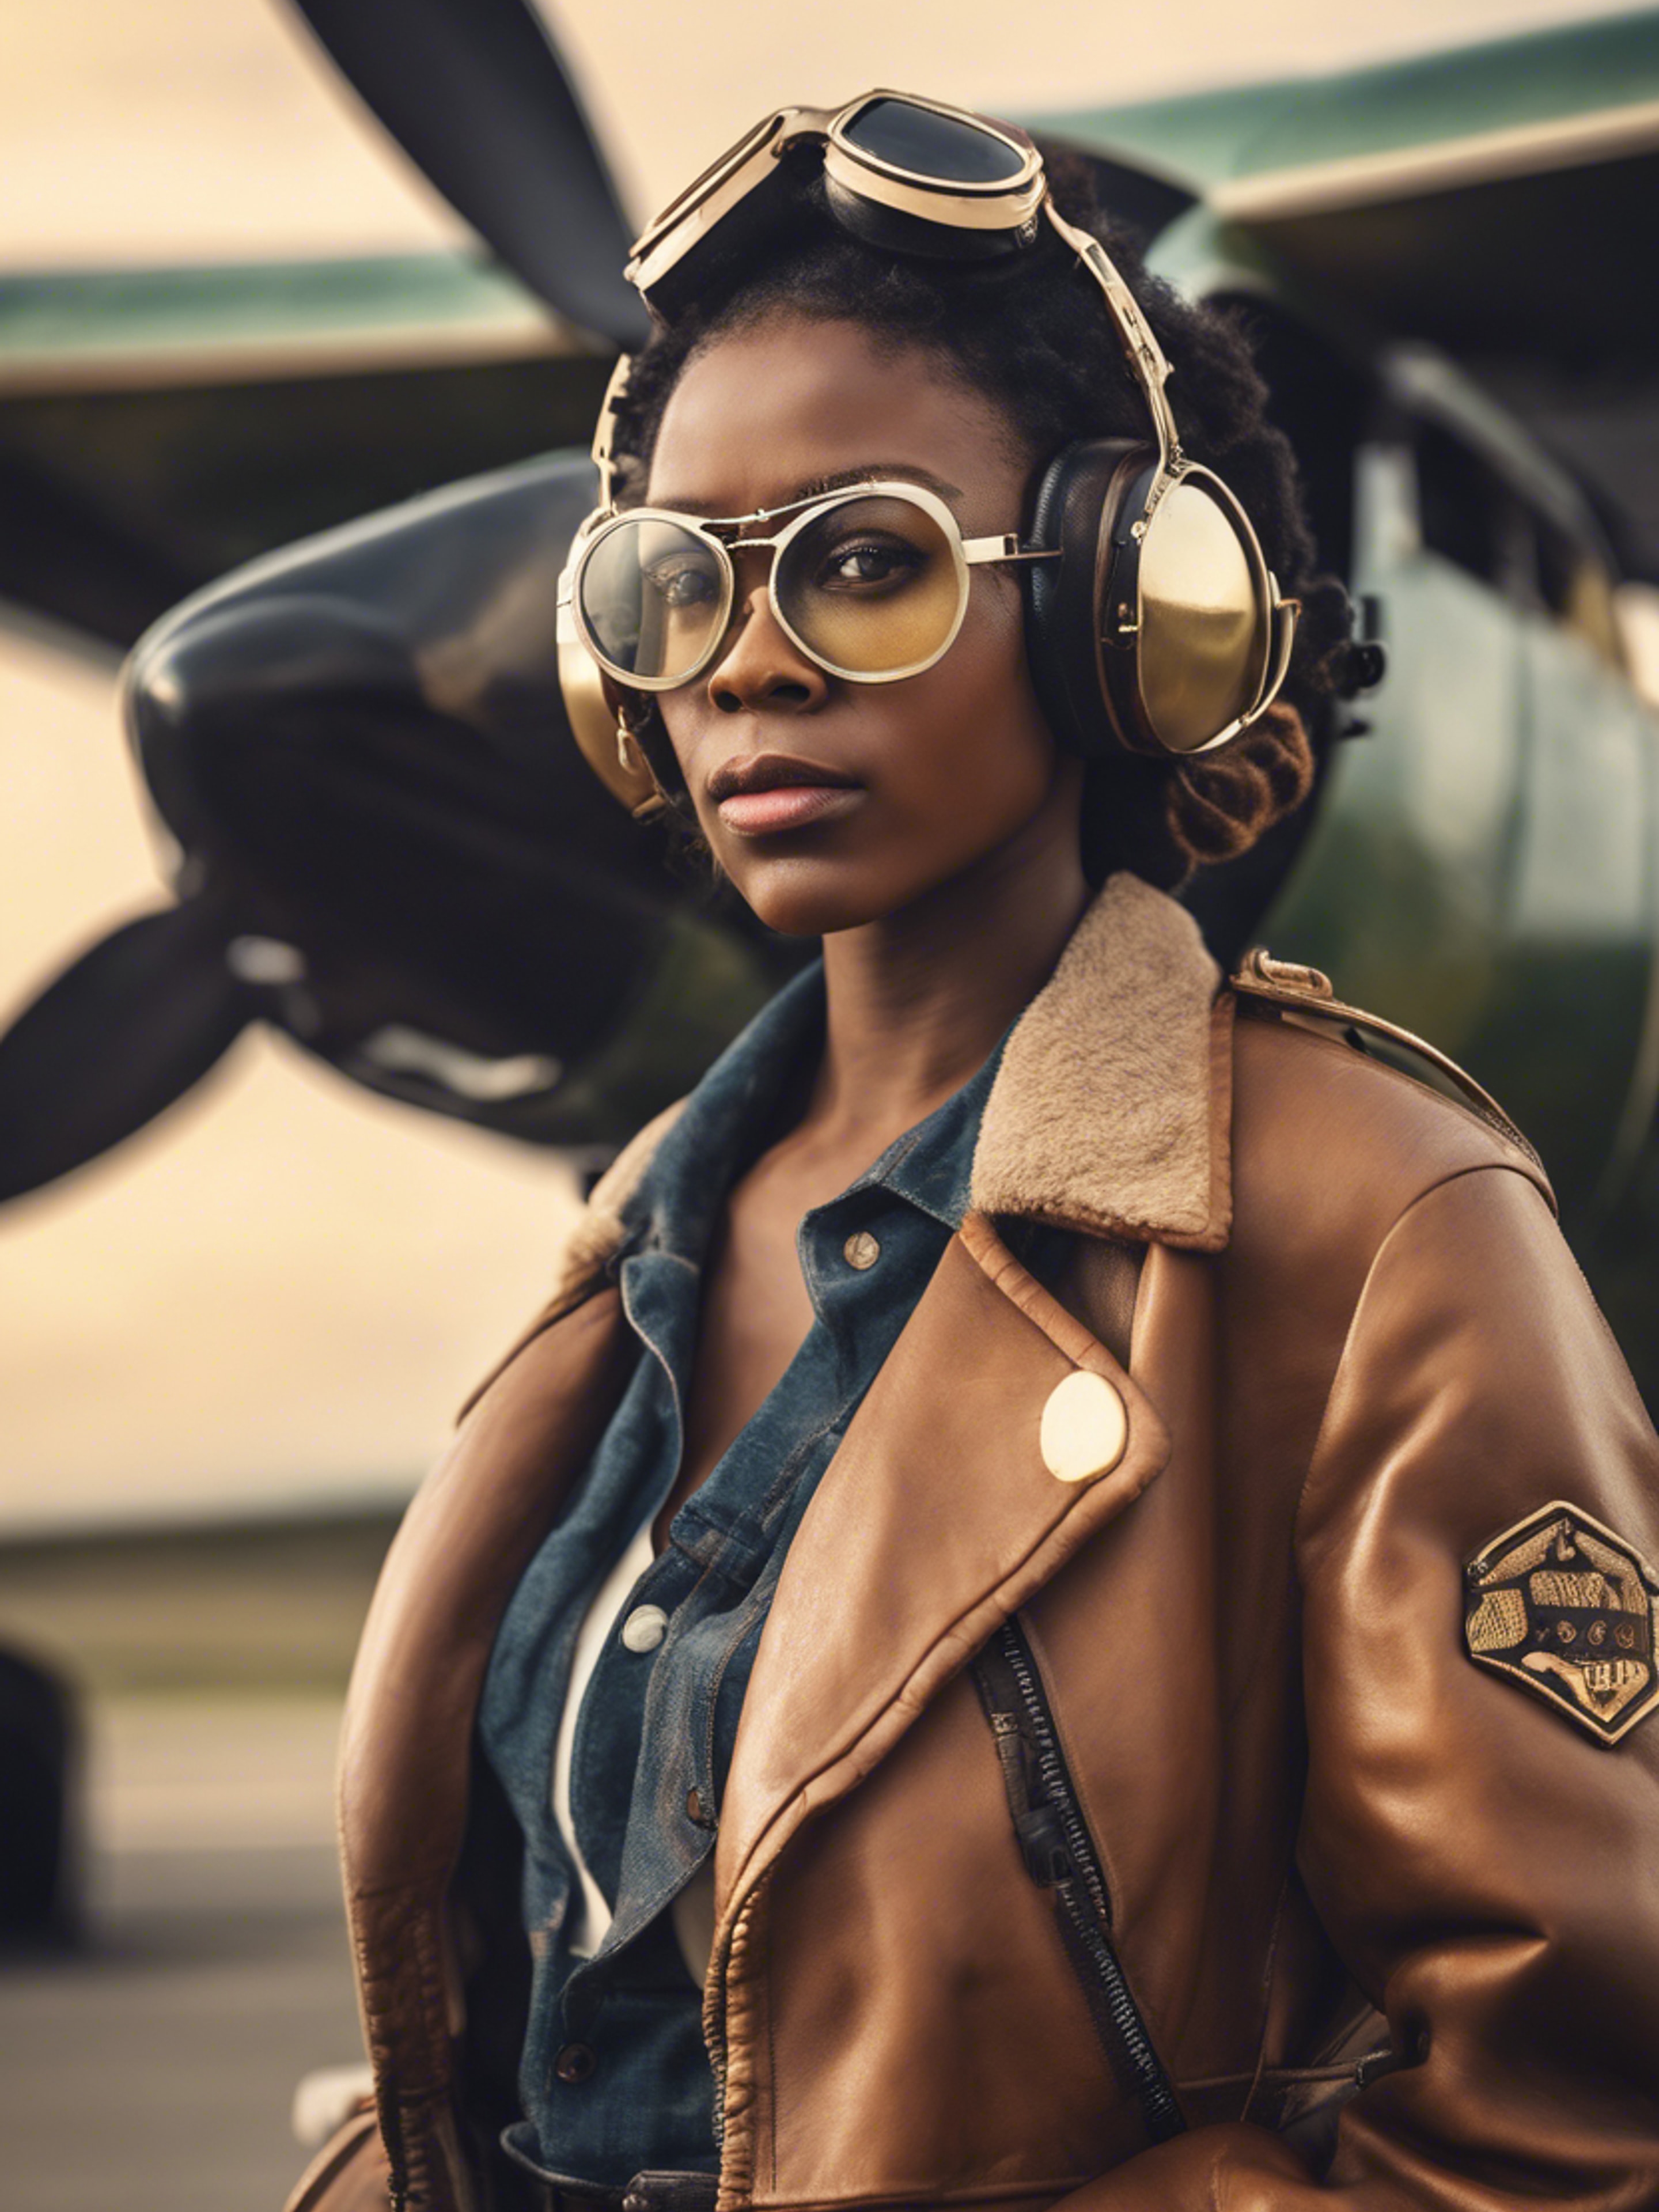 A black girl in an aviator jacket and goggles flying a retro propeller plane.壁紙[82958076c6f747e0ac9d]